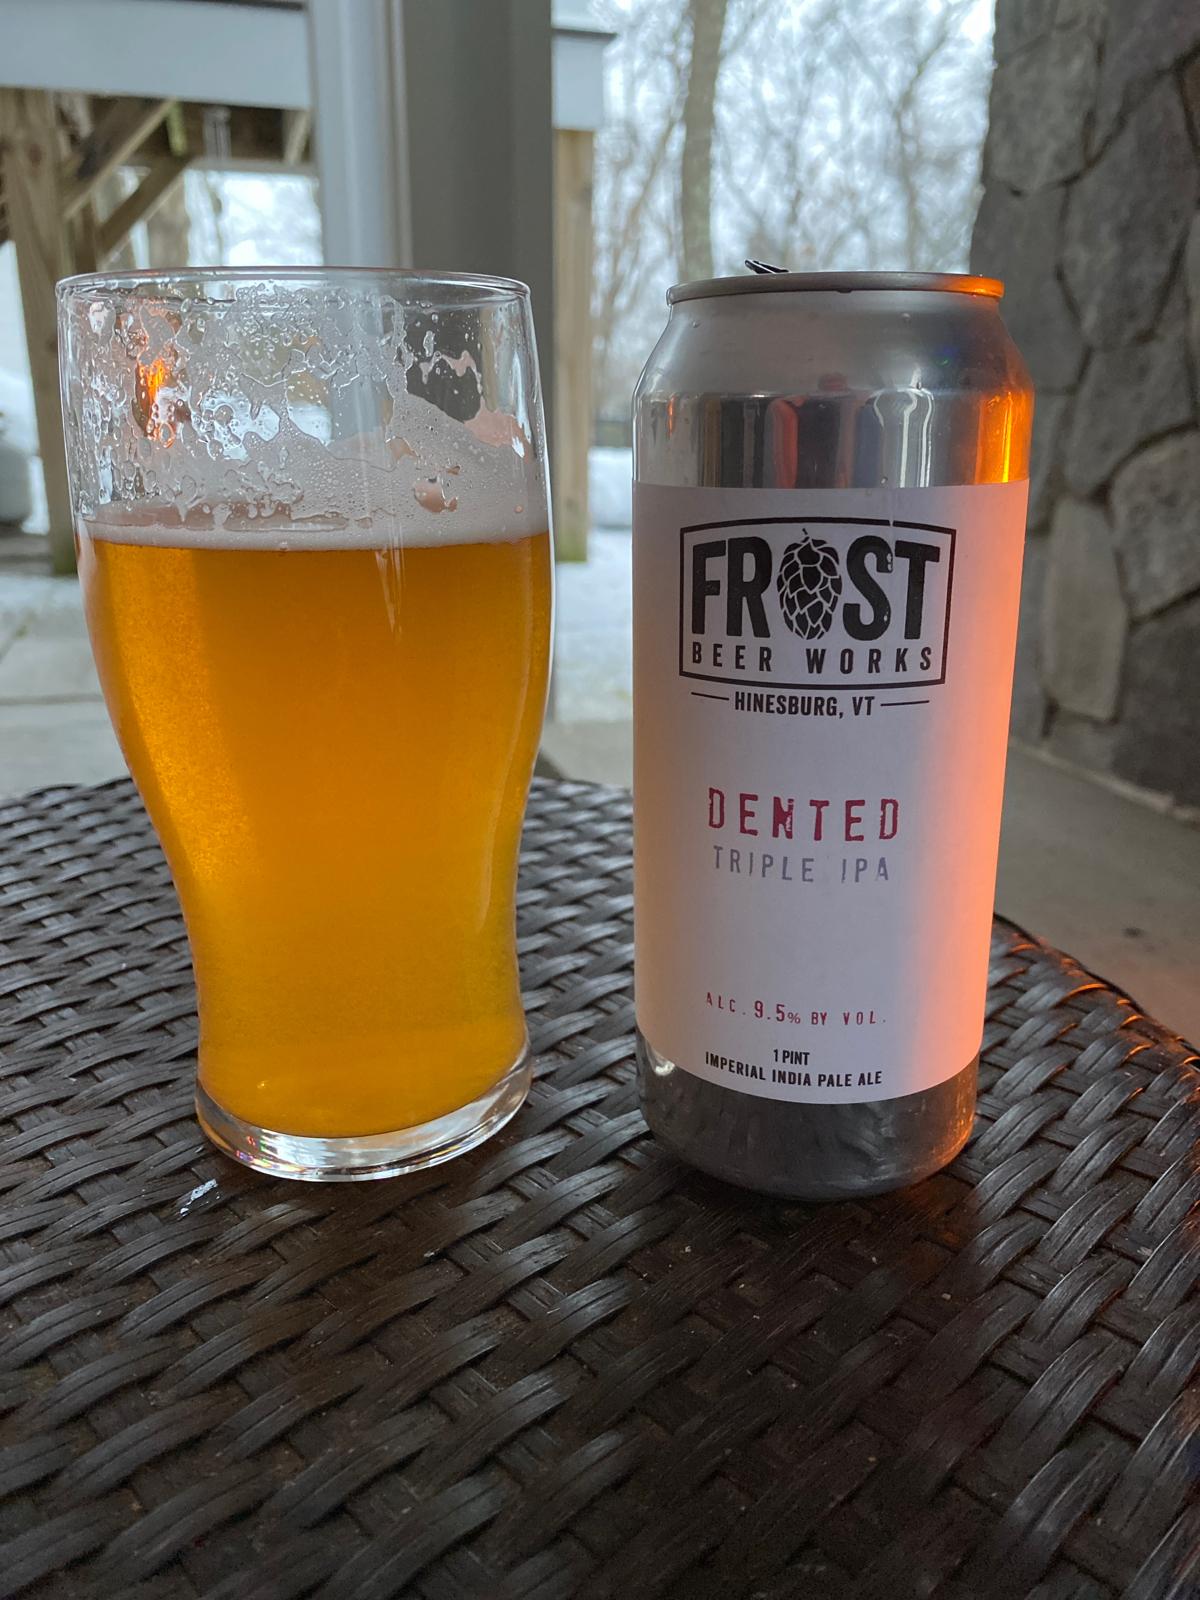 Dented Triple IPA - Research Series